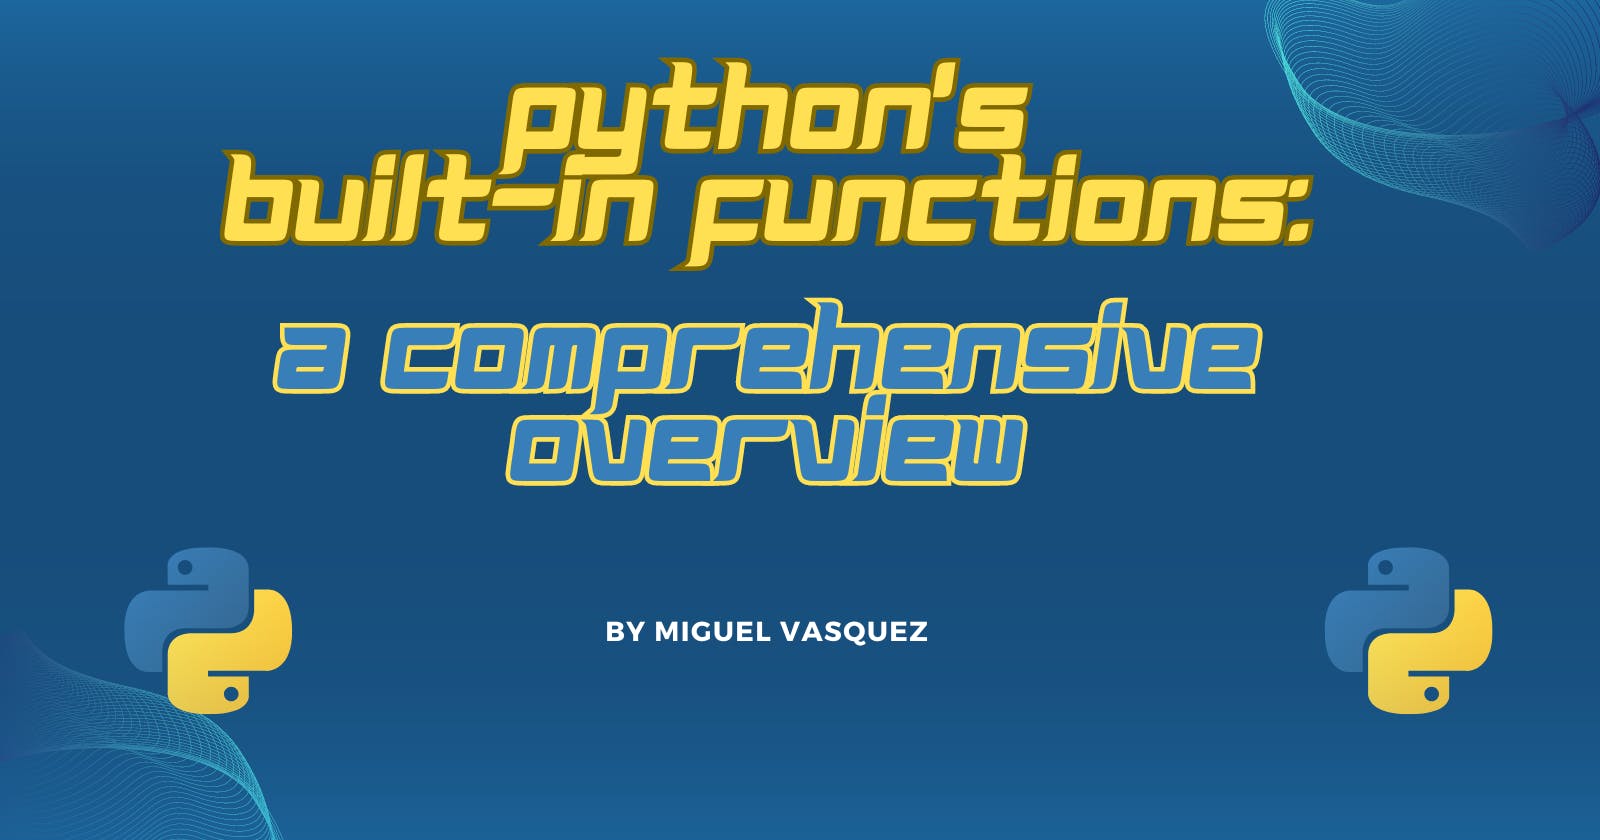 Python's Built-in Functions: A Comprehensive Overview